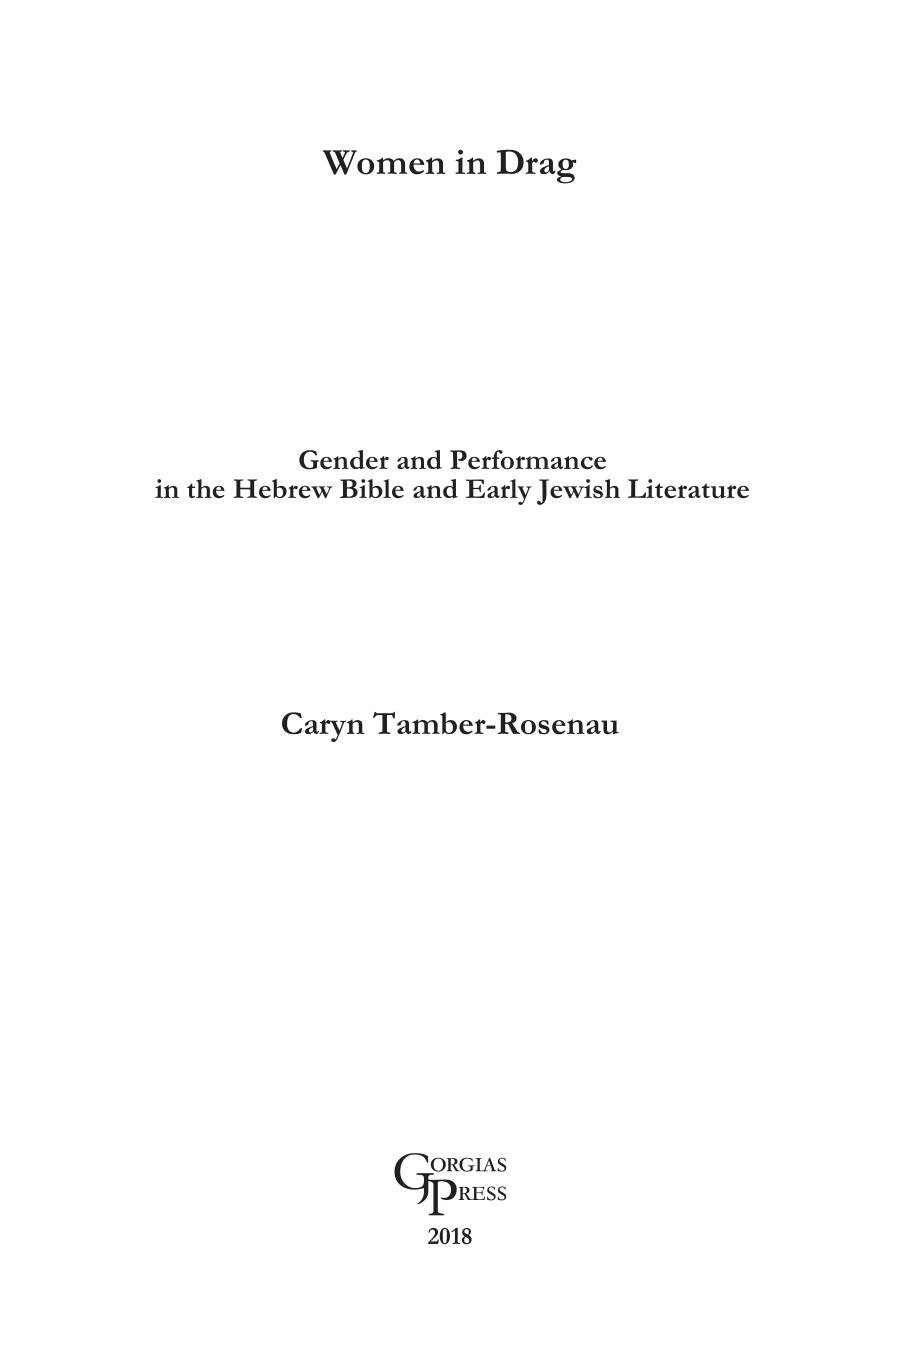 Women in Drag: Gender and Performance in the Hebrew Bible and Early Jewish Literature by Caryn Tamber-Rosenau